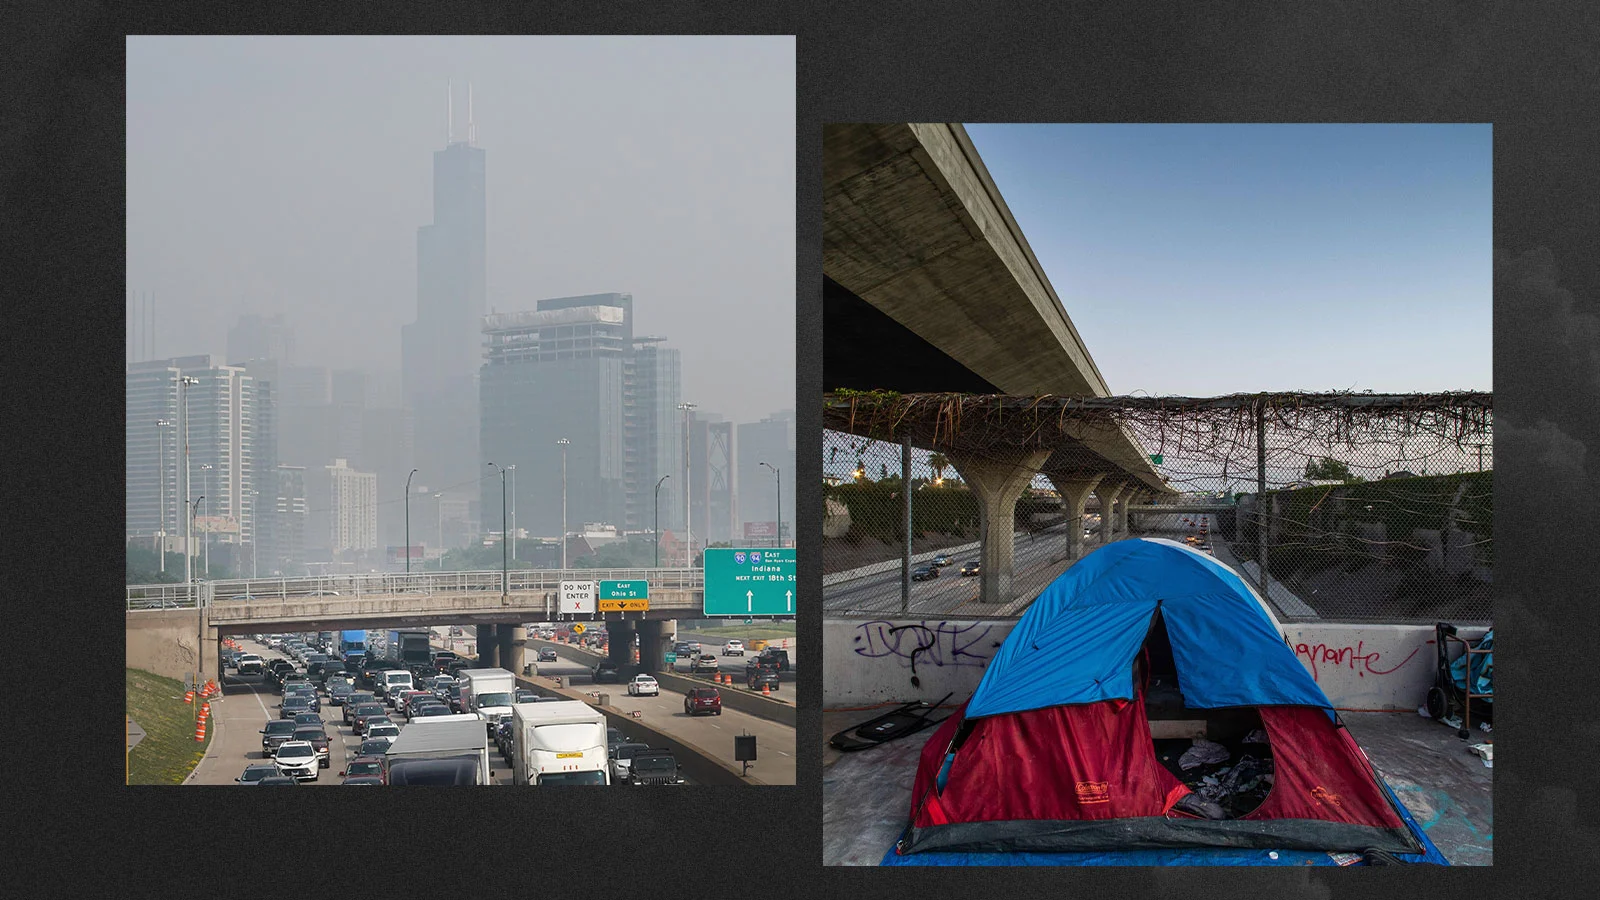 Two photos side by side, one of smoke and haze over a highway and cityscape, and the other of a tent under a highway overpass.